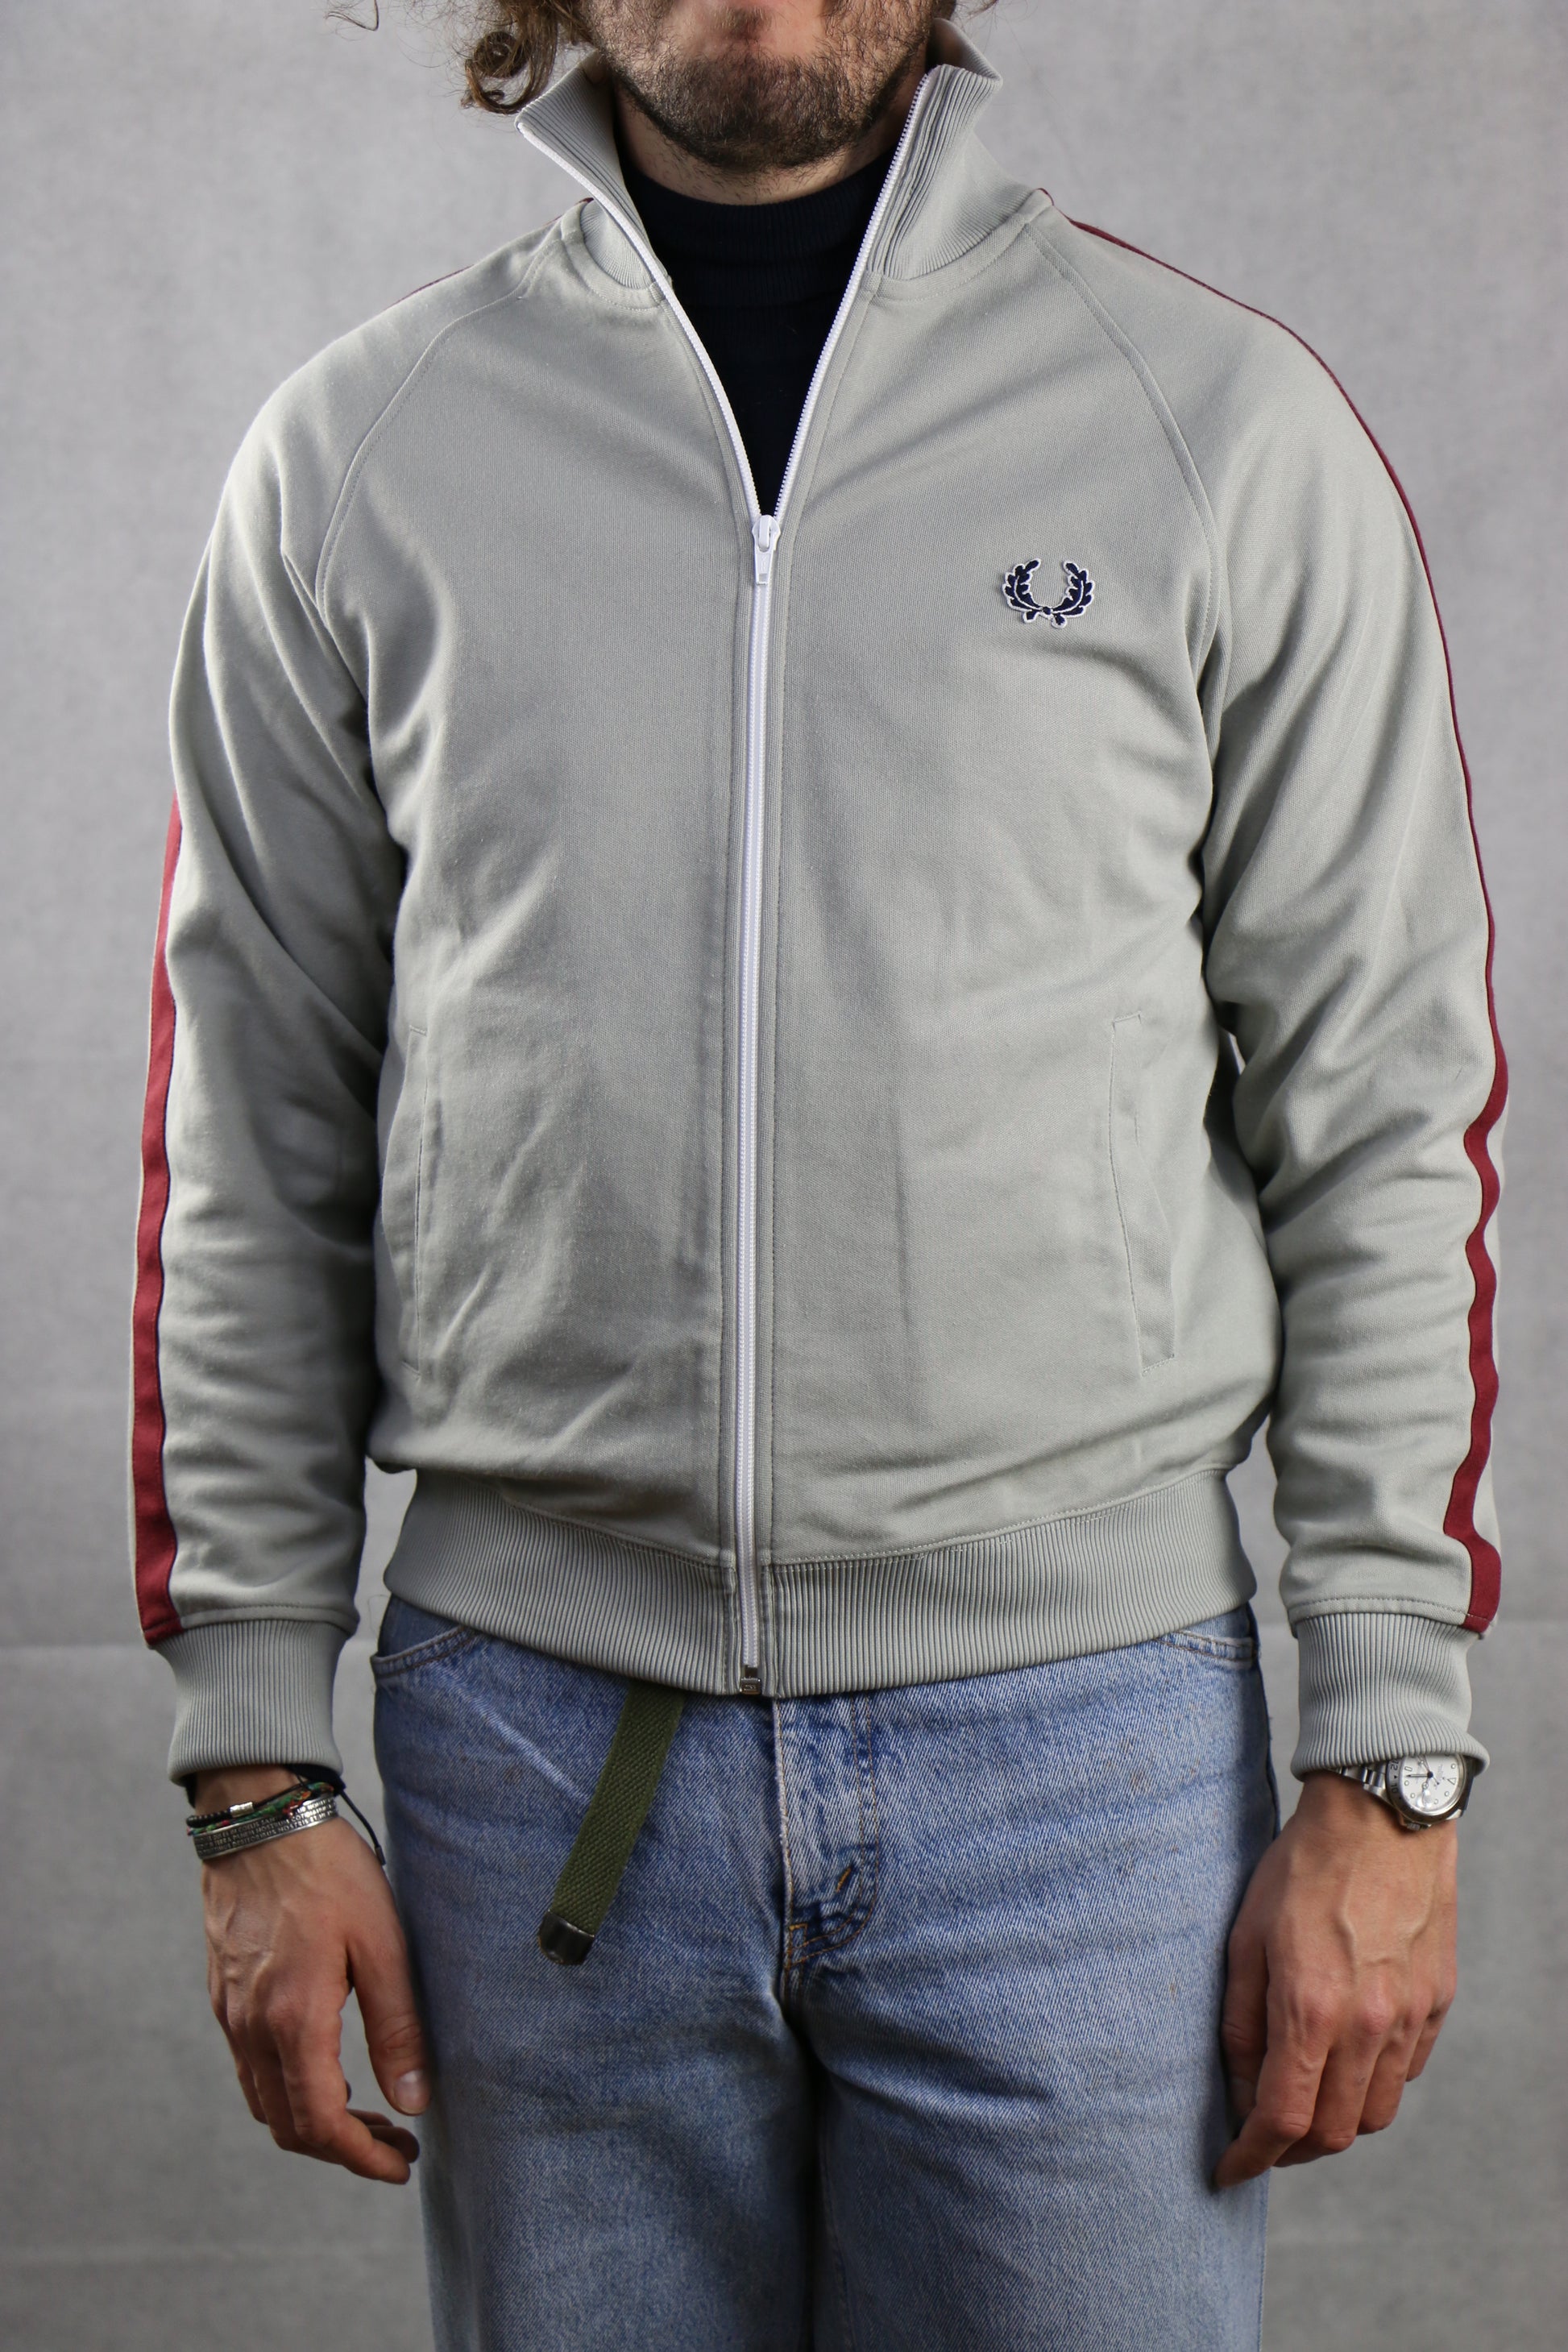 Fred Perry Track Jacket - vintage clothing clochard92.com